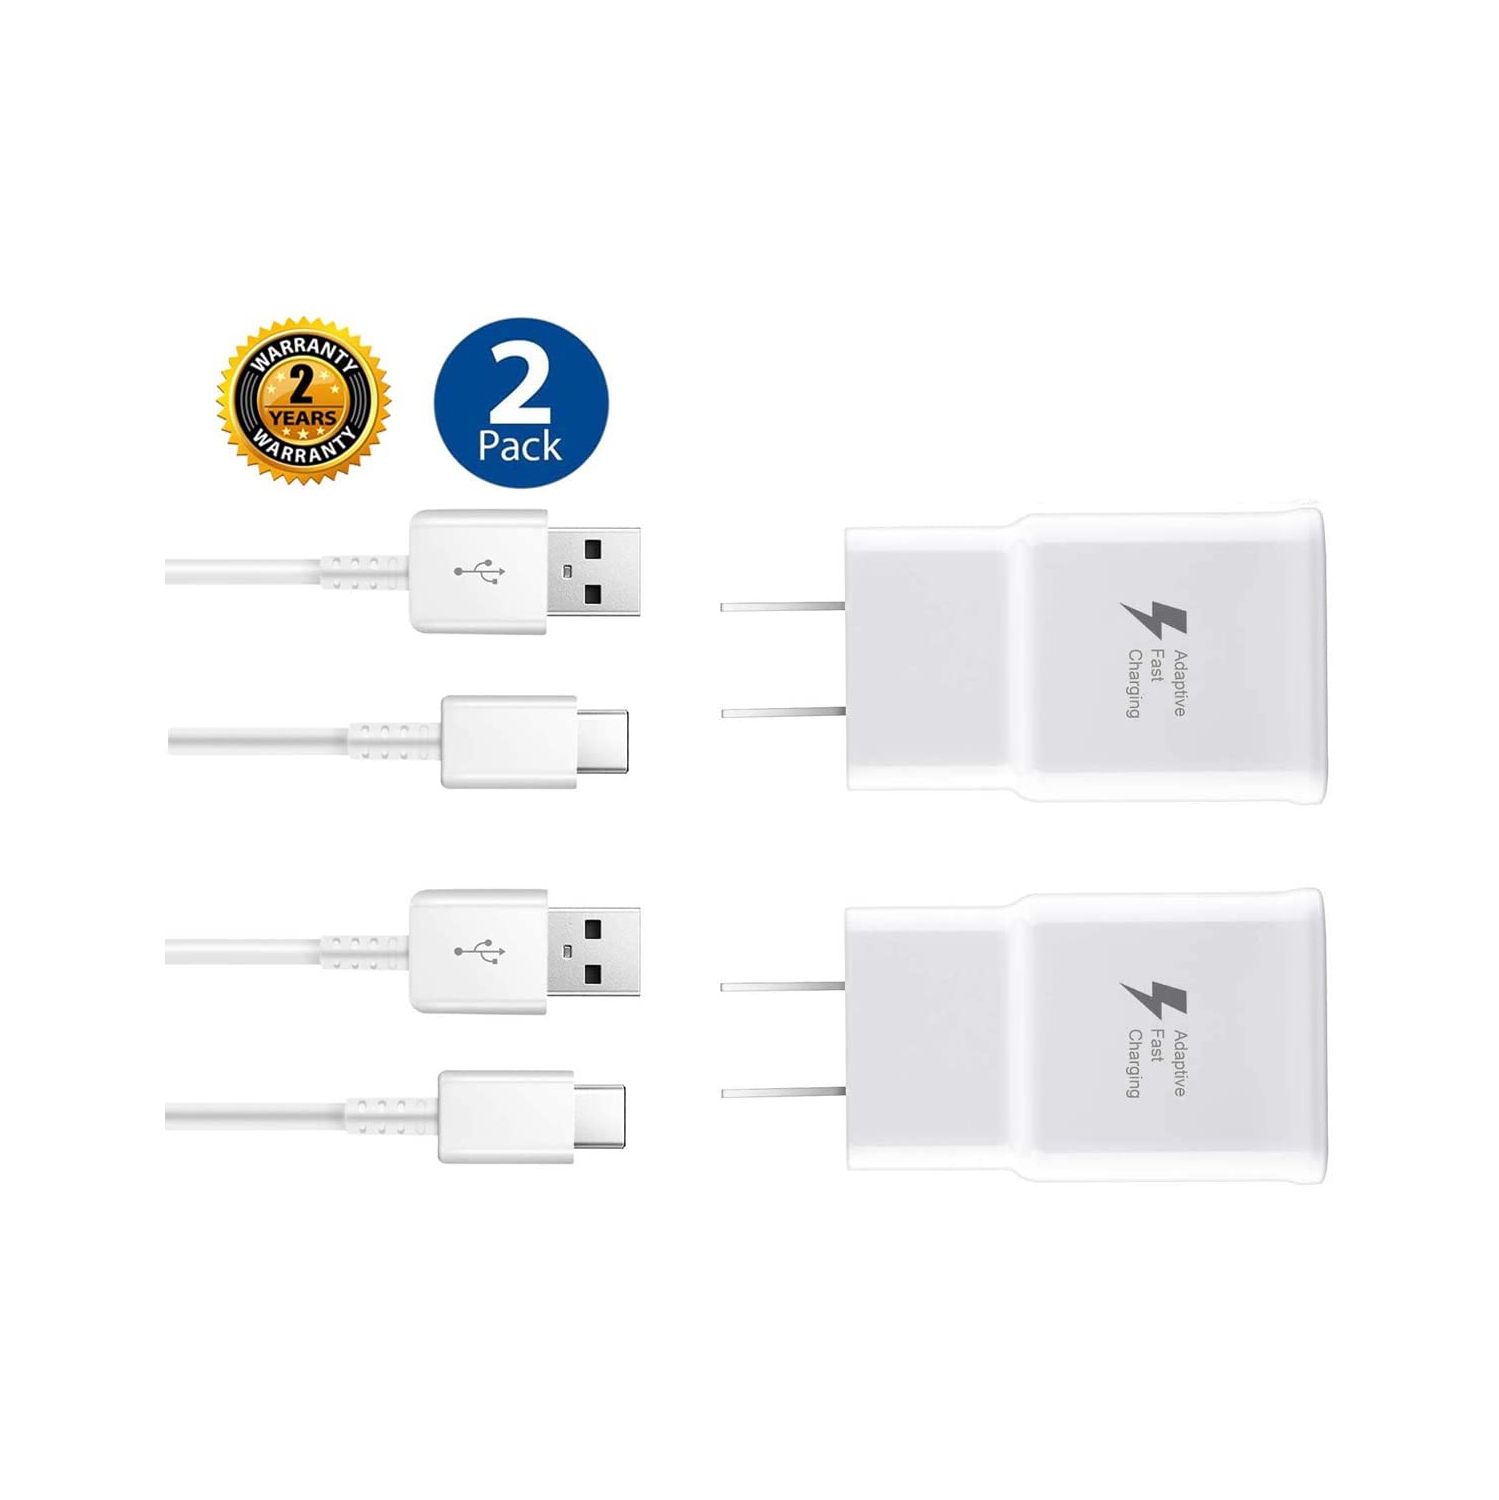 Samsung Adaptive Fast Charger Kit,LaoFas Quick Charge USB Wall Charger for Samsung Galaxy S10/S9/S8/S8 Plus/Note8/9{2 Type-C Cables + 2 Wall Chargers}Charge up to 50% Faster (White)